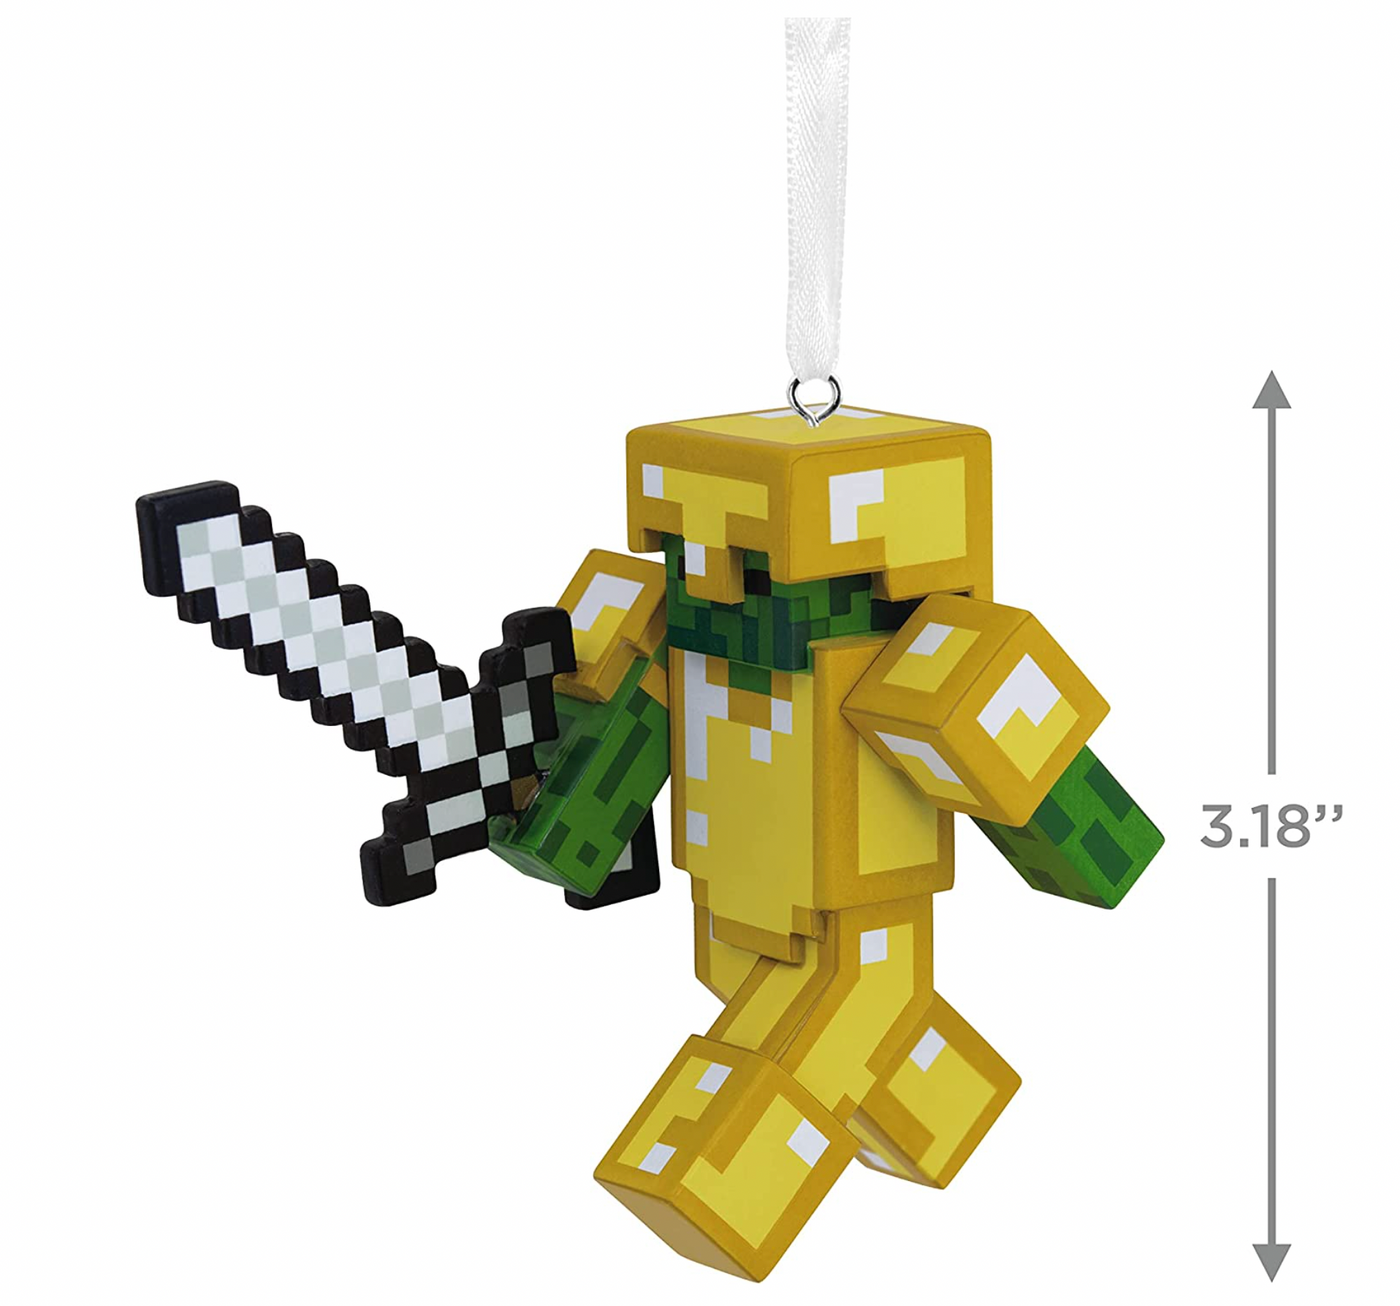 Hallmark Minecraft Zombie with Sword and Armor Christmas Ornament New with Box